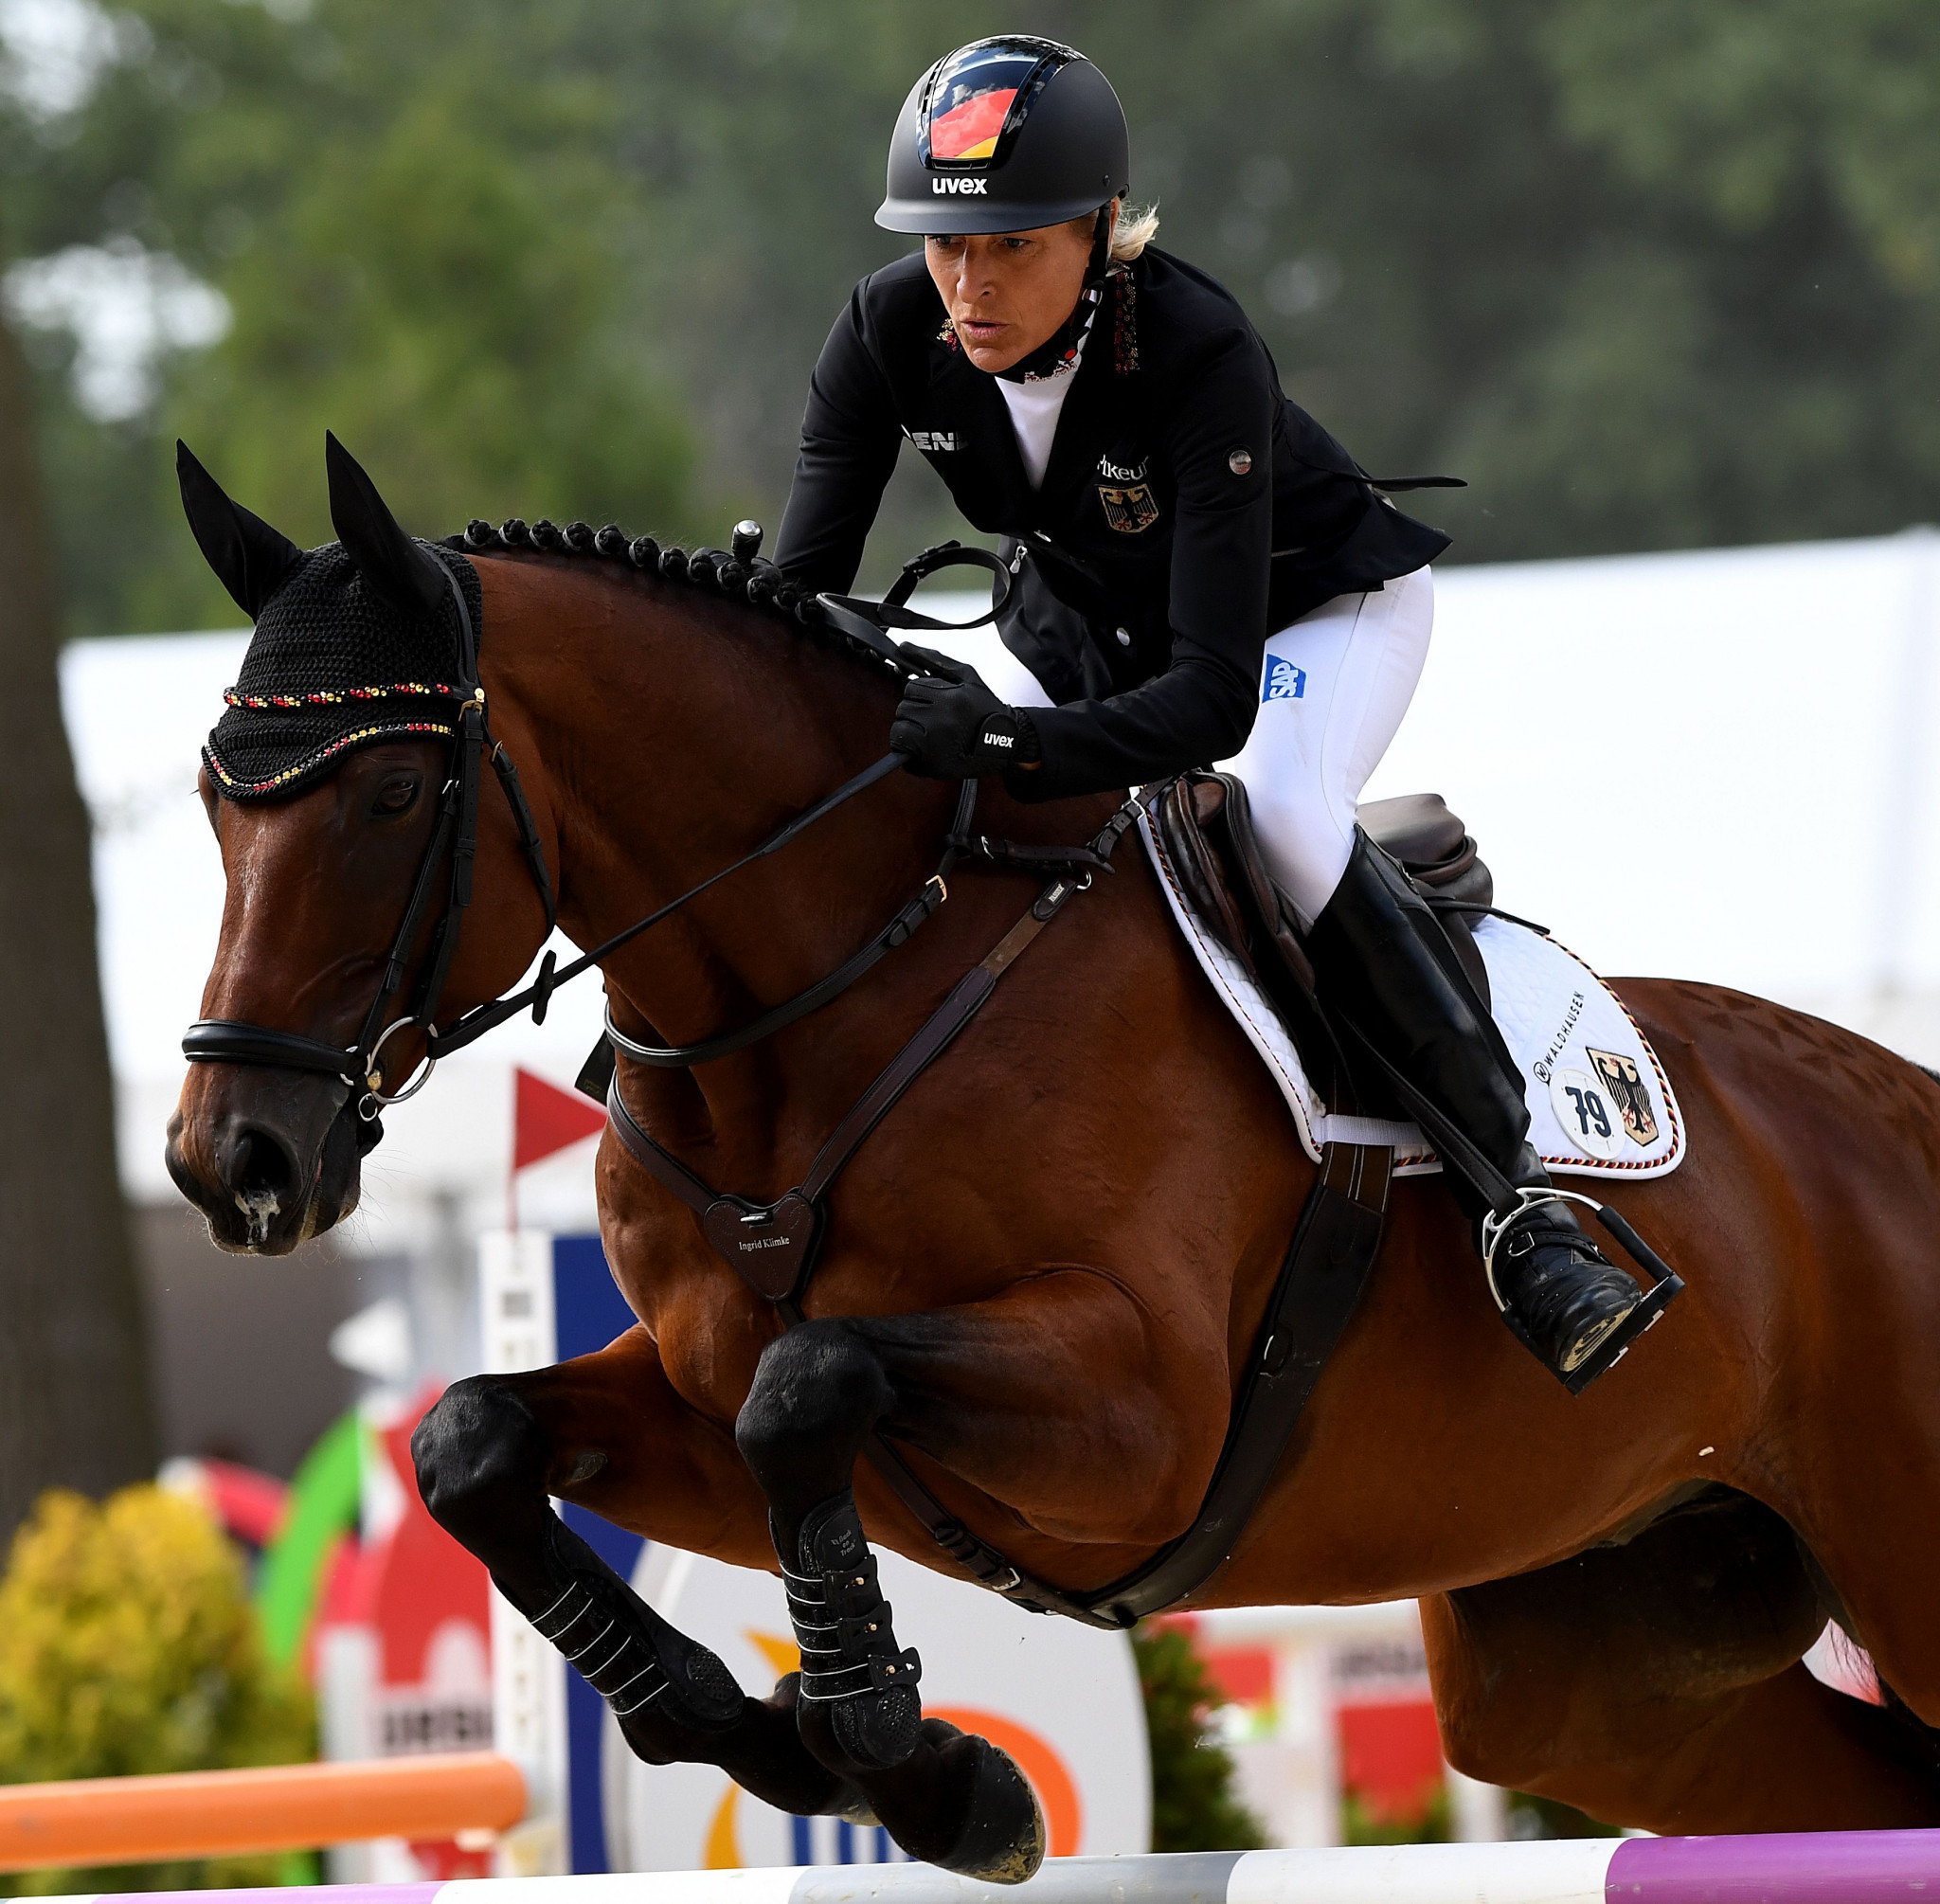 Germany look to catch Sweden in third leg of FEI Eventing Nations League